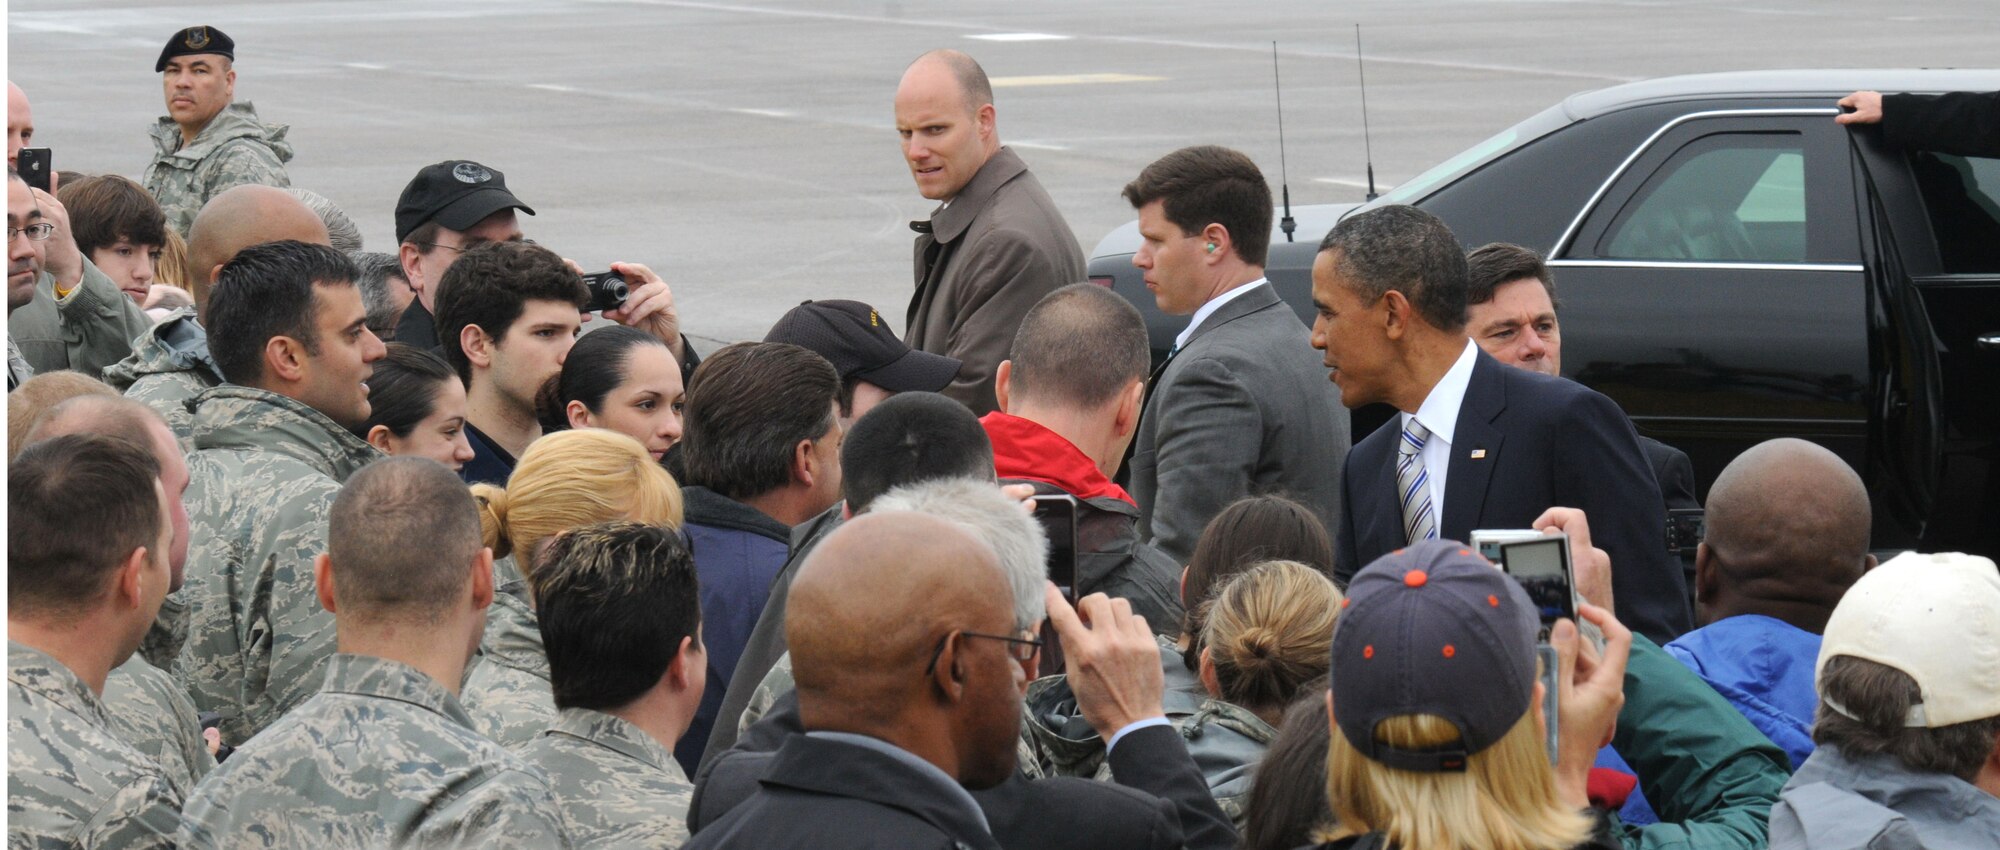 President Barack Obama greets members of the 103rd Airlift Wing, Connecticut Air National Guard, on the edge of the ramp at Bradley Air National Guard Base, East Granby, Conn. May 18, 2011, after deplaning Air Force One.  The Commander in Chief had a brief stop over here before traveling by motorcade to New London to address graduating cadets at the U.S. Coast Guard Academy. (U.S. Air Force photo by Airman 1st Class Emmanuel Santiago)